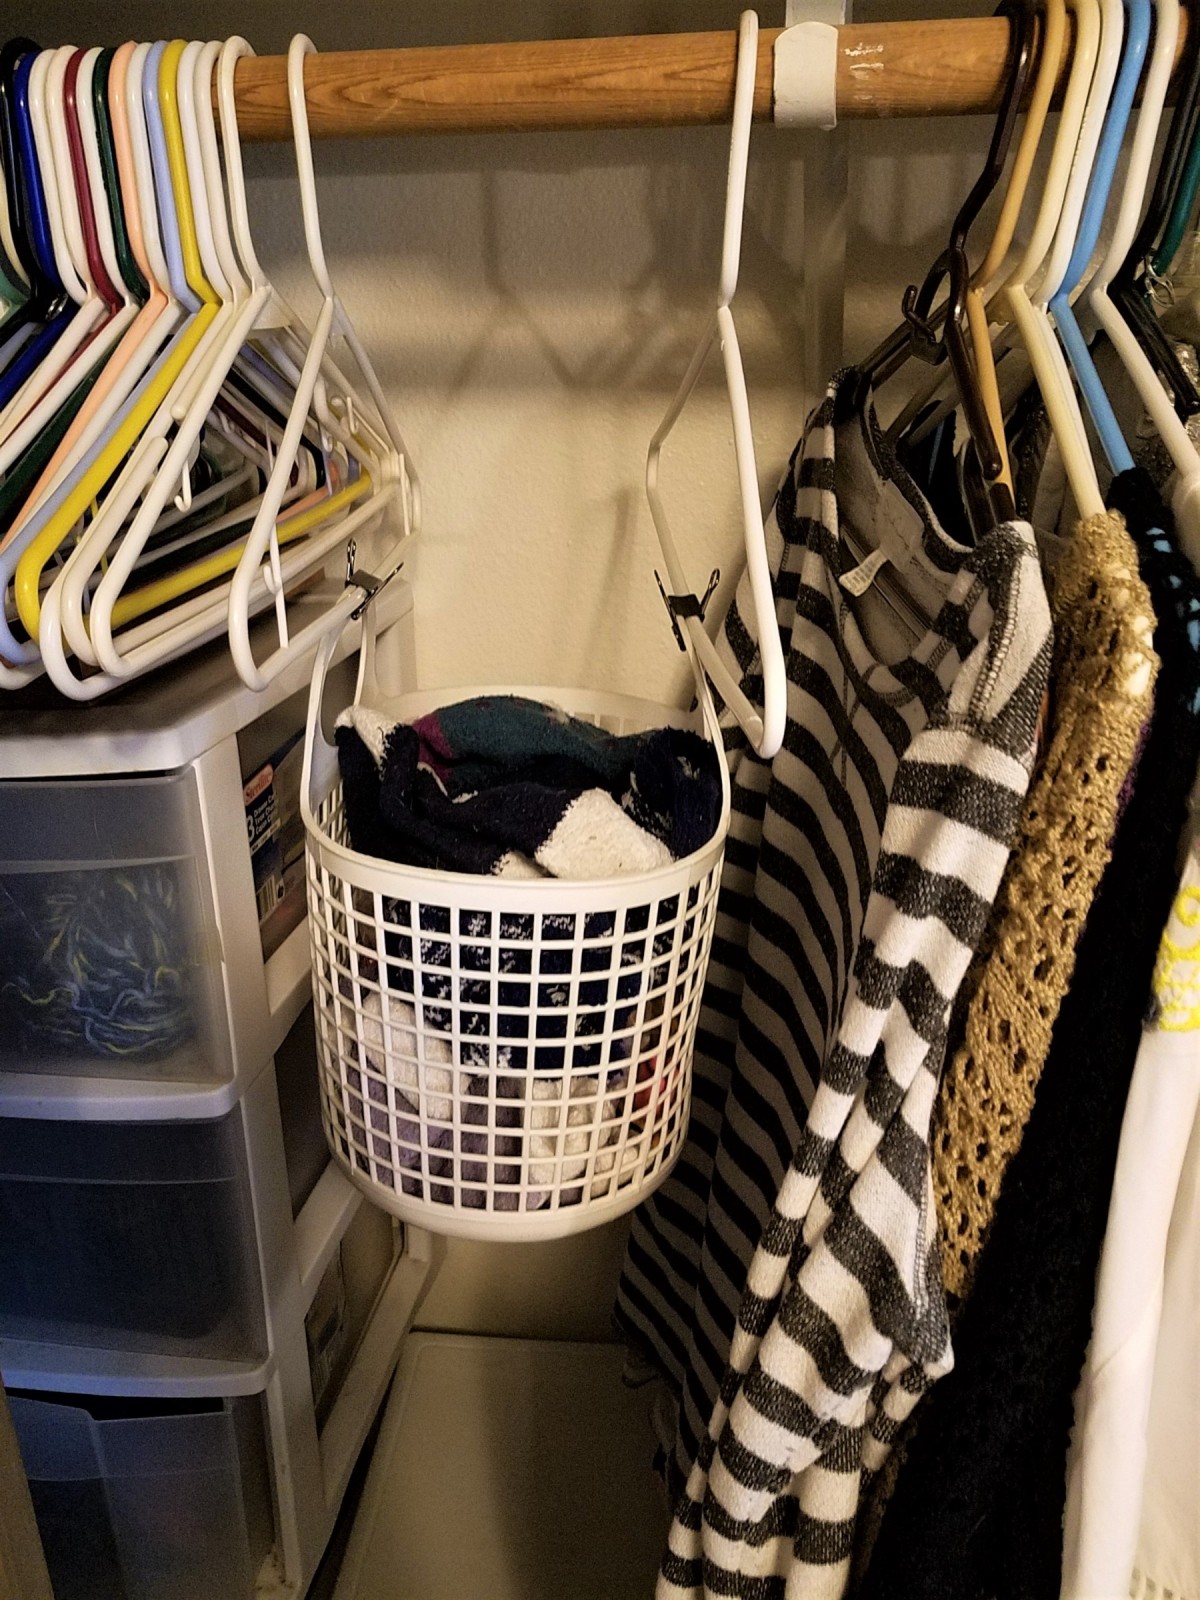 Sock Storage from the Dollar Tree